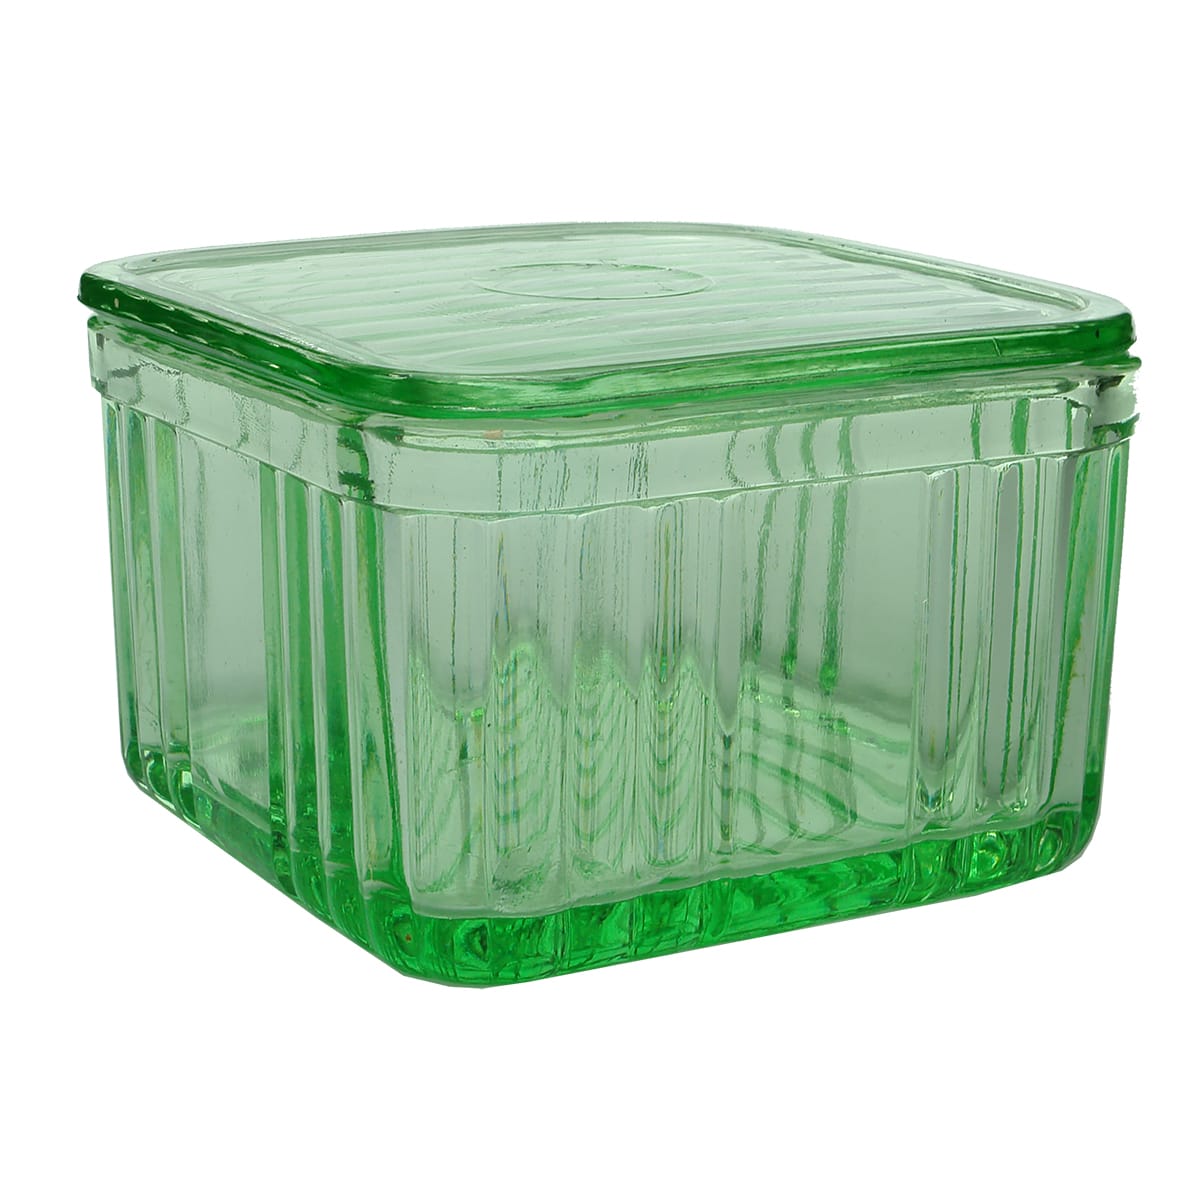 Glassware. Green depression glass square lidded container.